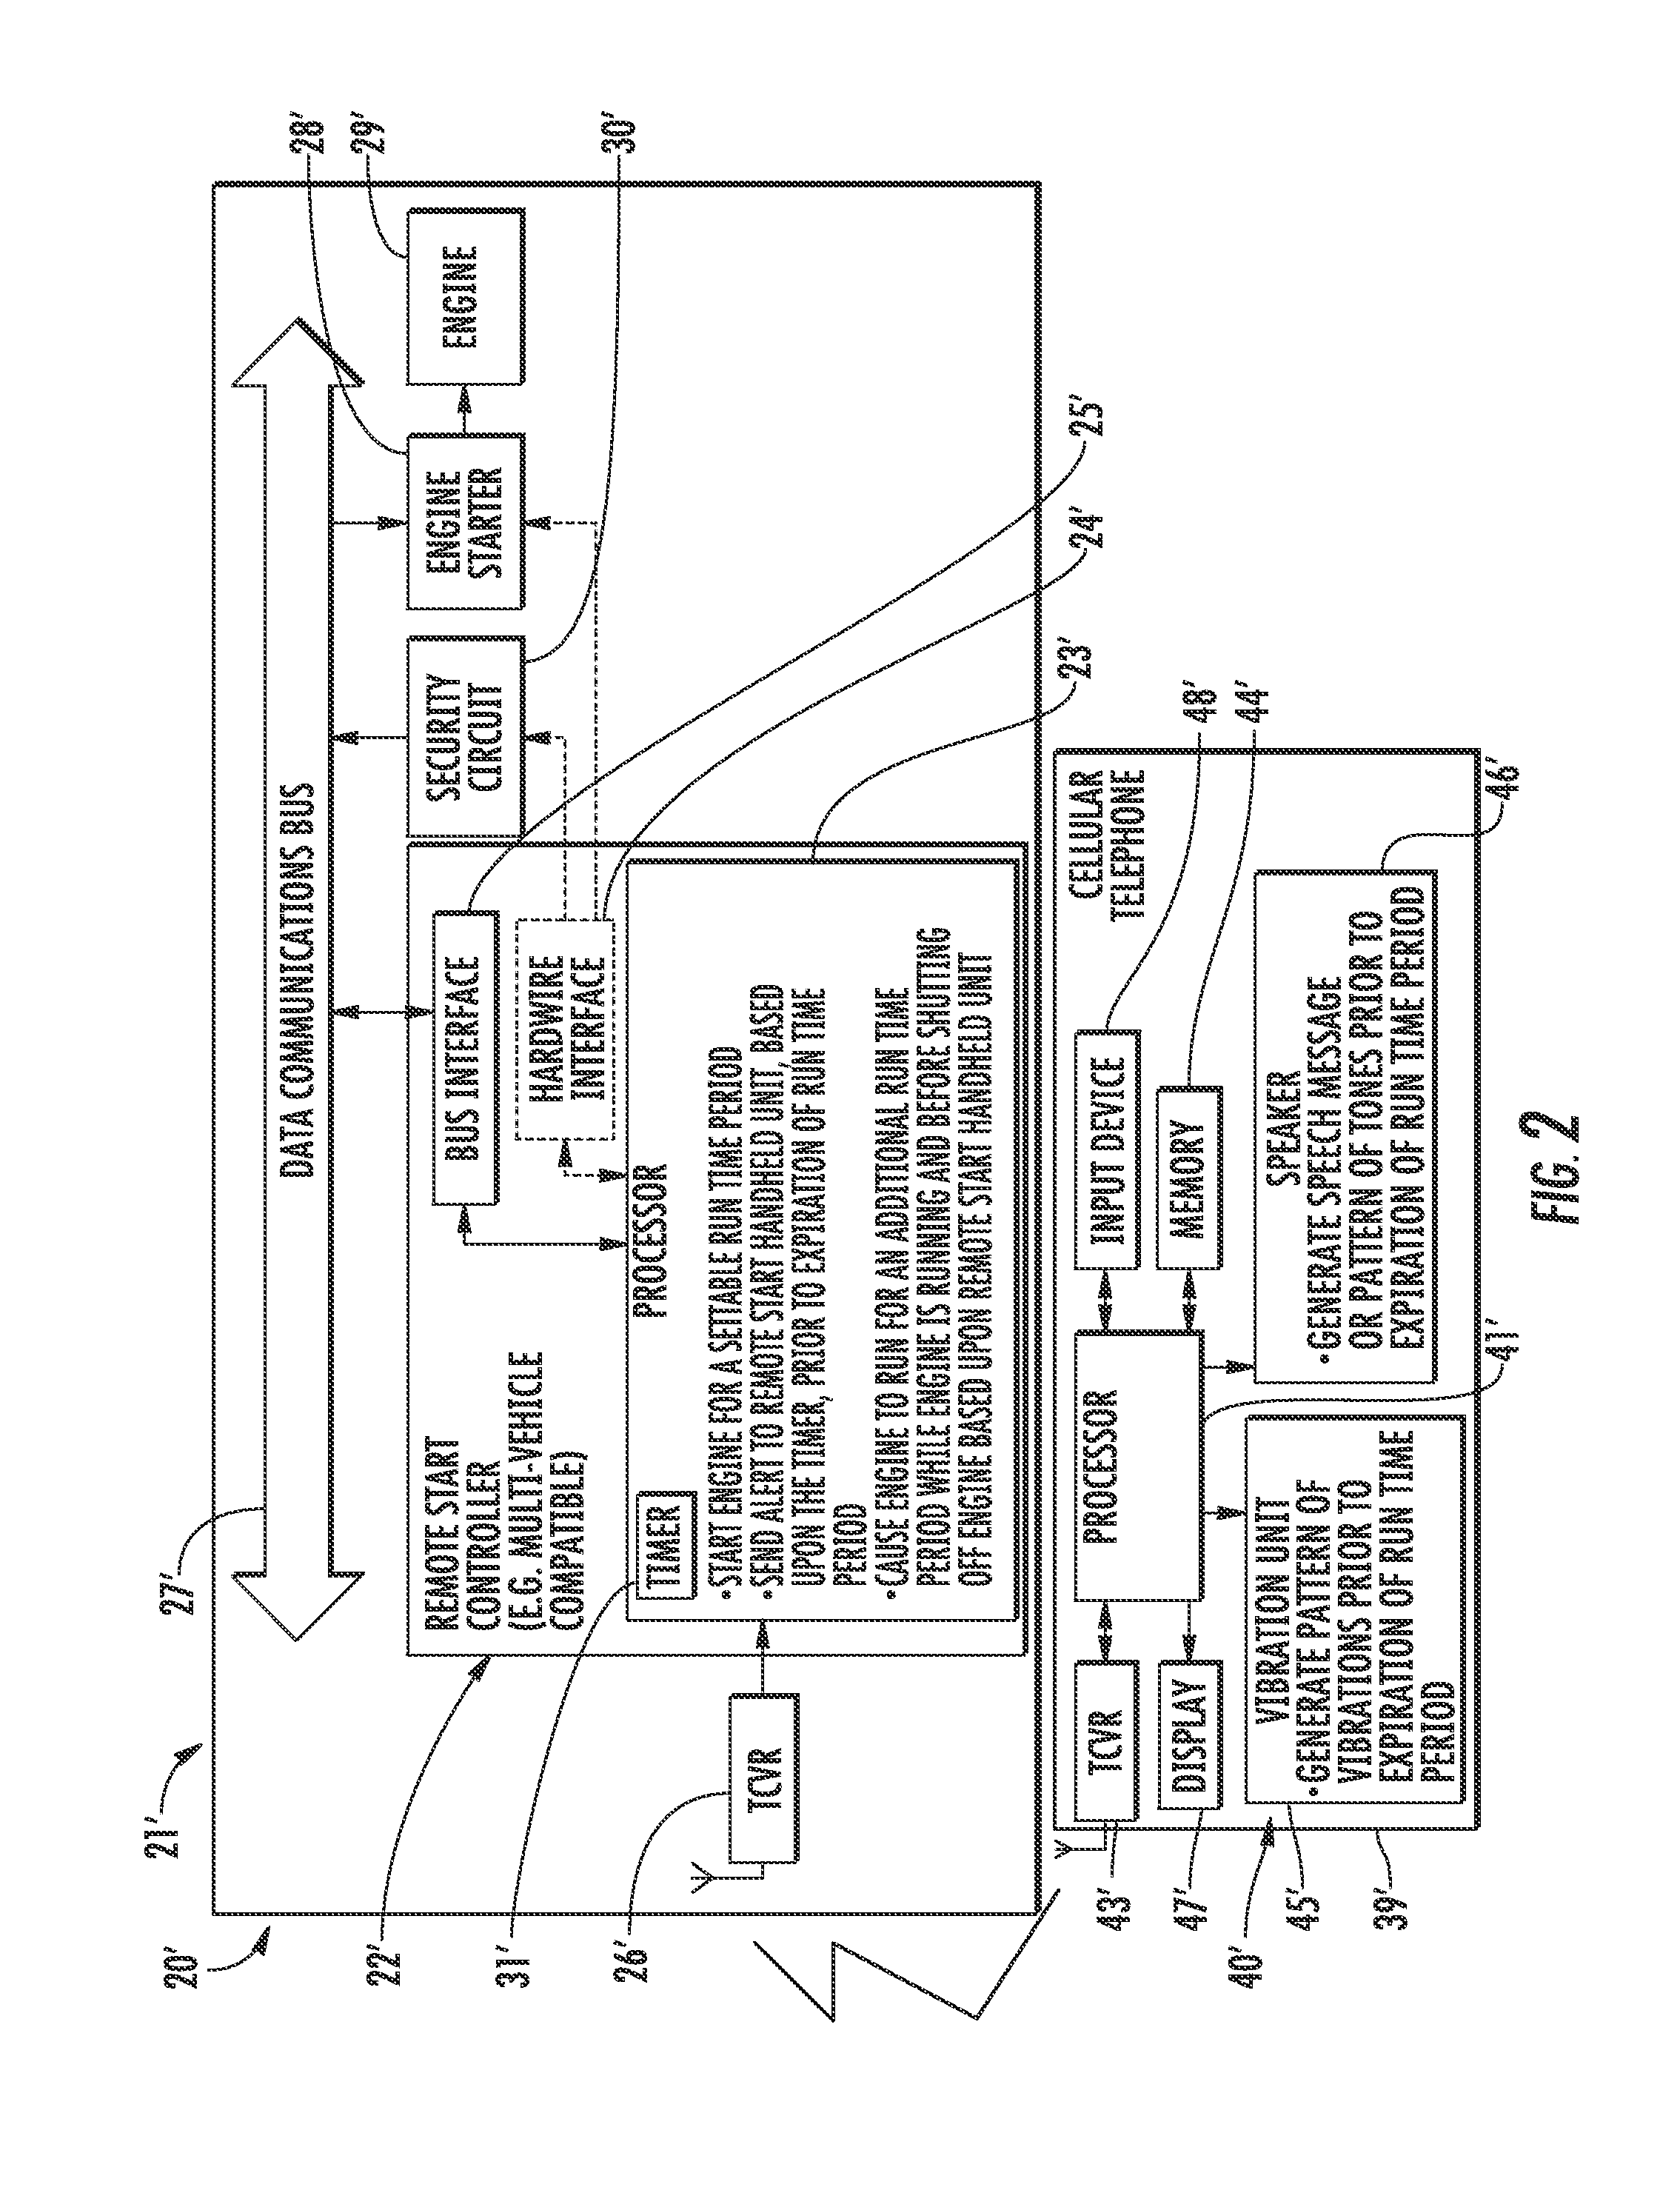 Remote vehicle starting system providing a tactile indication relating to remote starting and associated methods